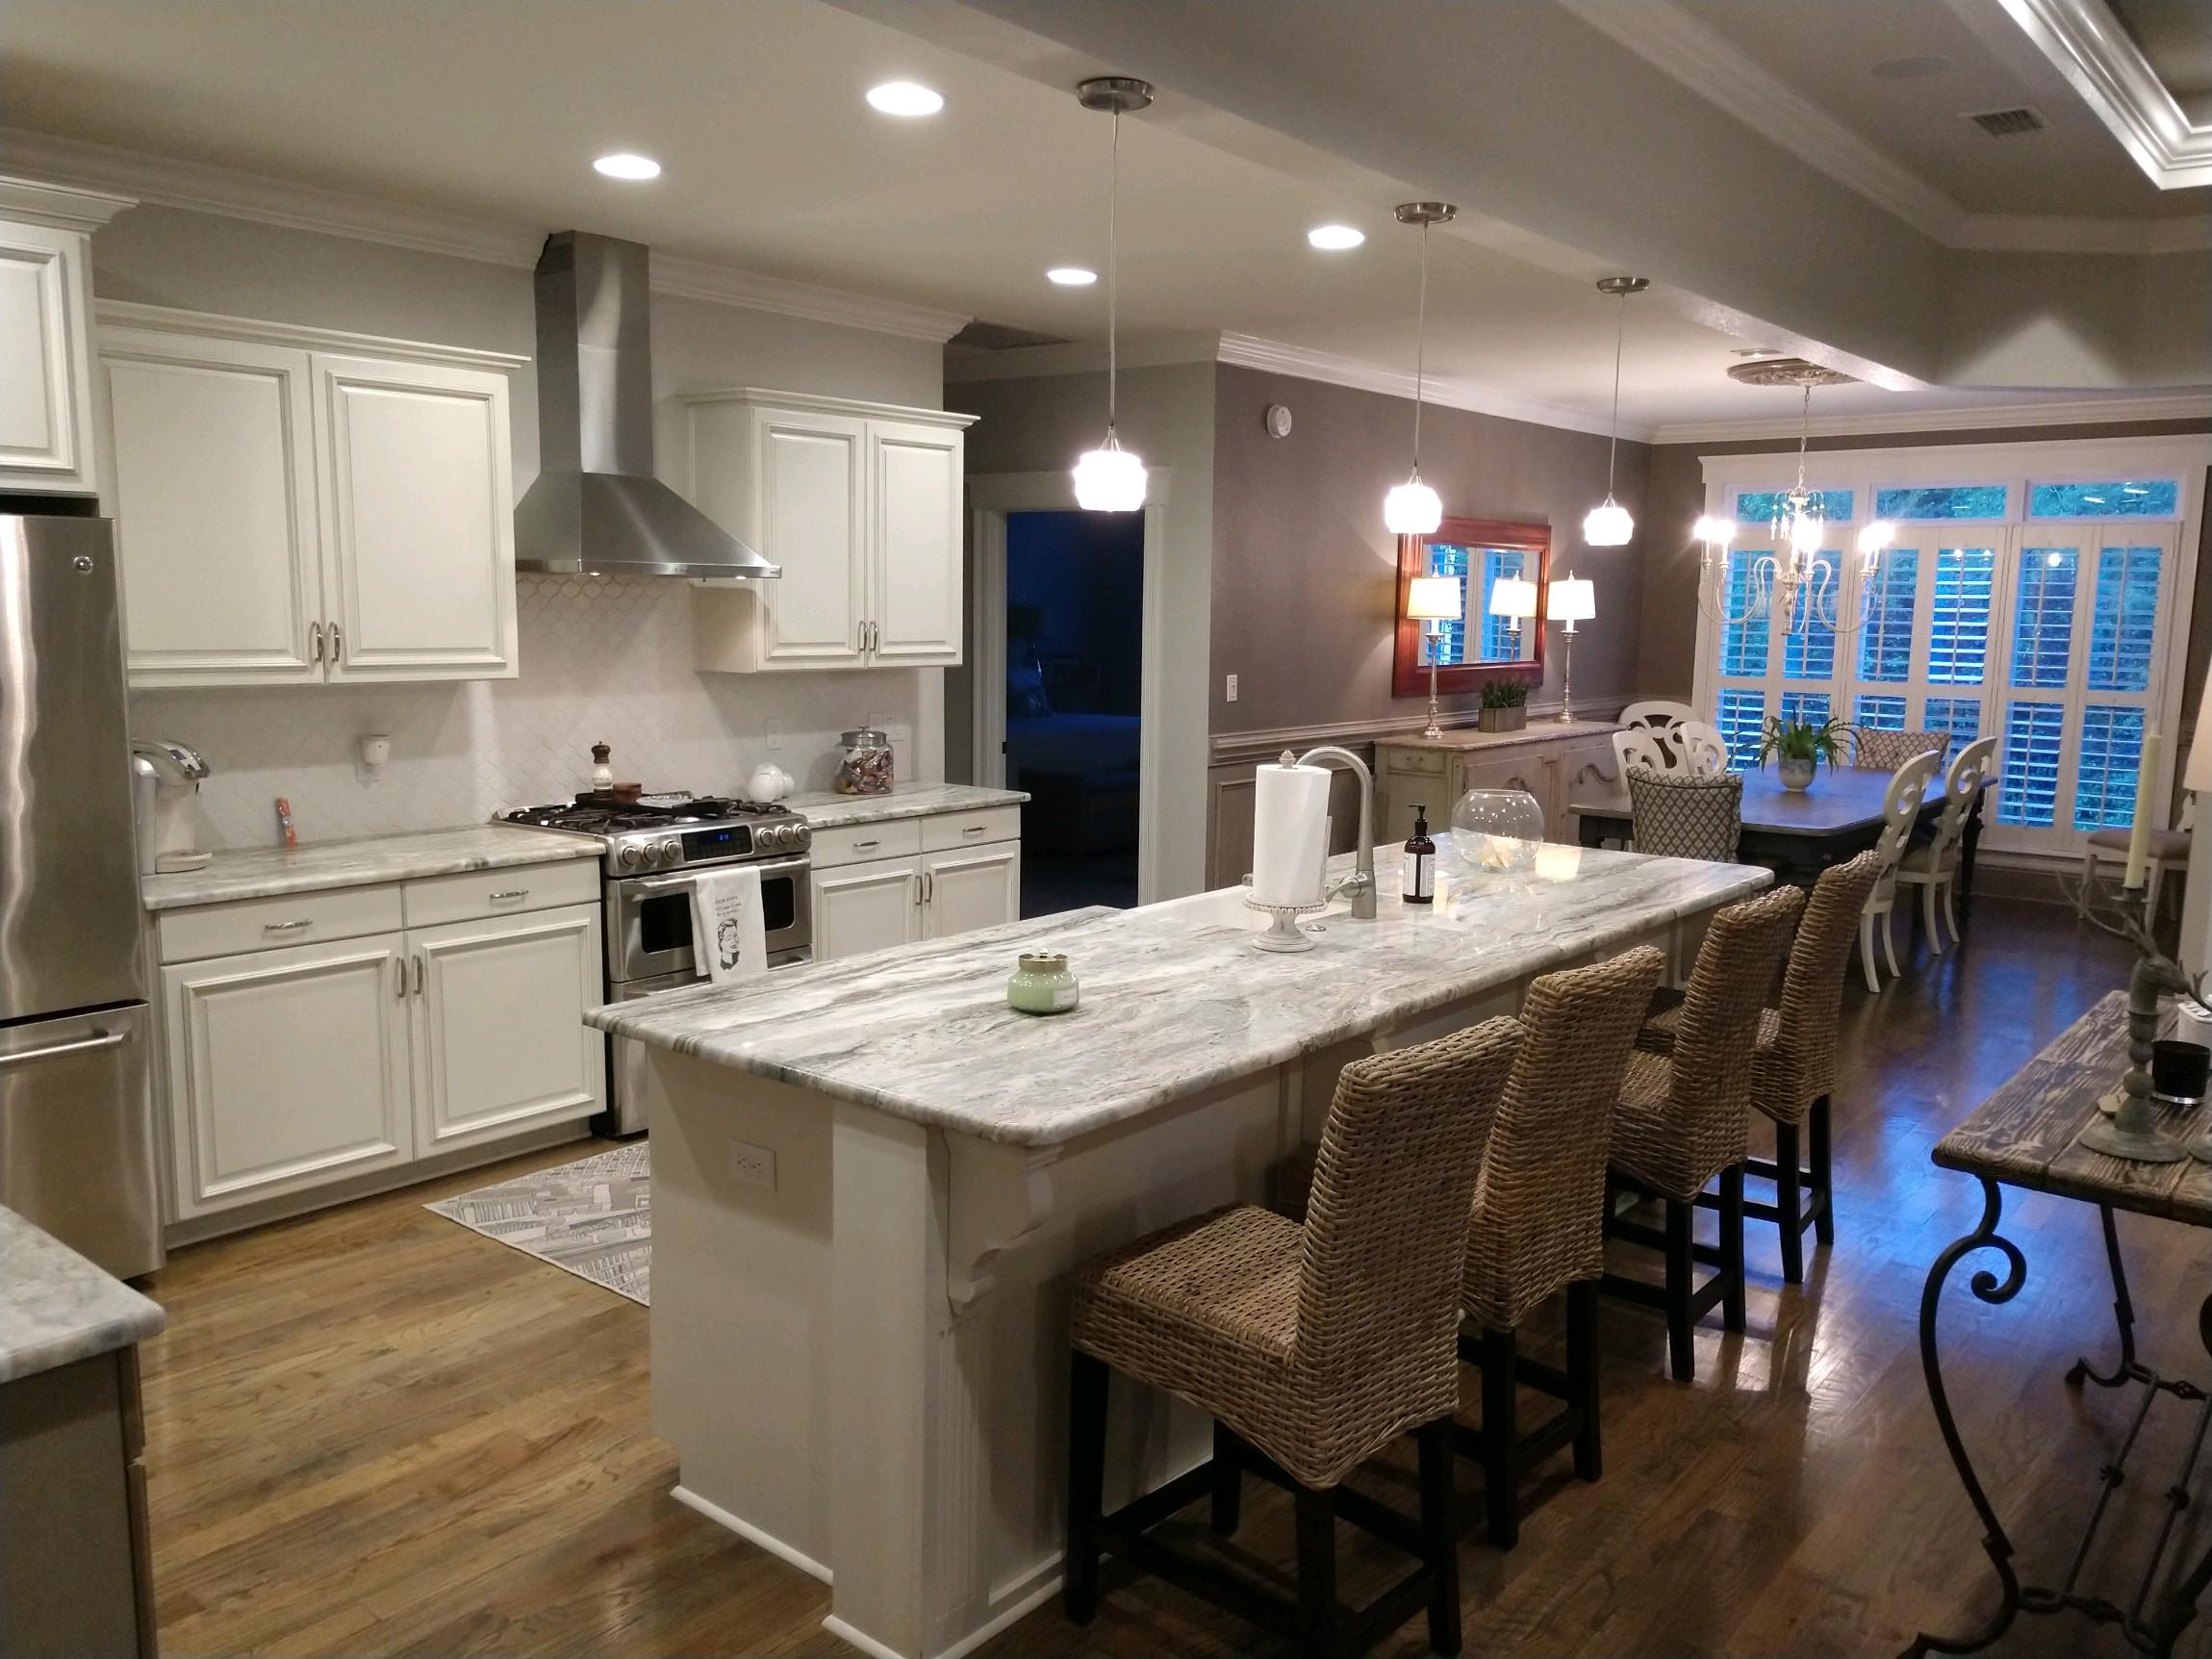 Decorative picture showing a kitchen. Security cameras can be used to eavesdrop on conversations buyers have with their Tallahassee Realtor